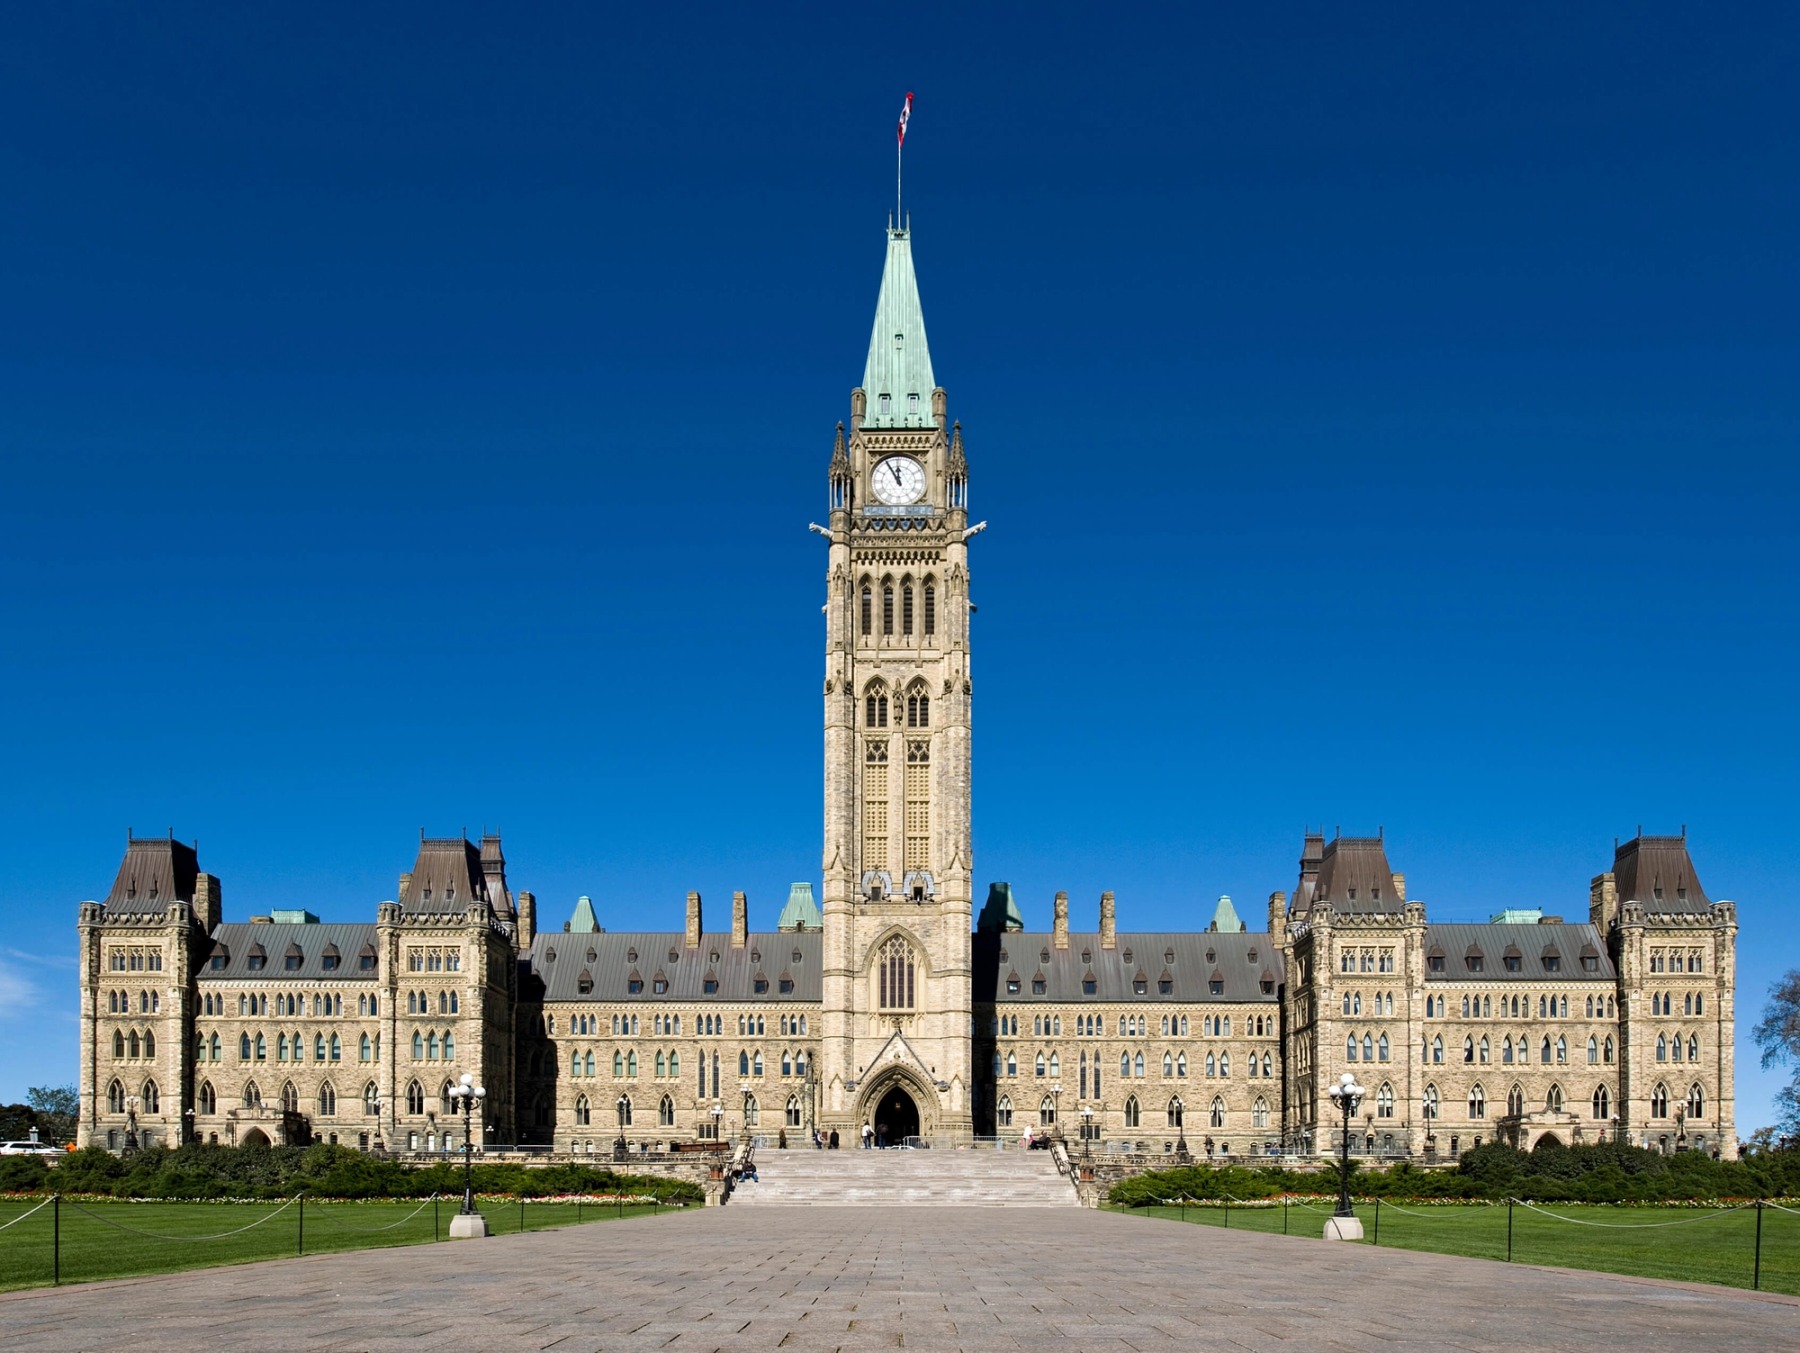 The Canadian Federal Parliament Building with a blue sky and green grass lawn.